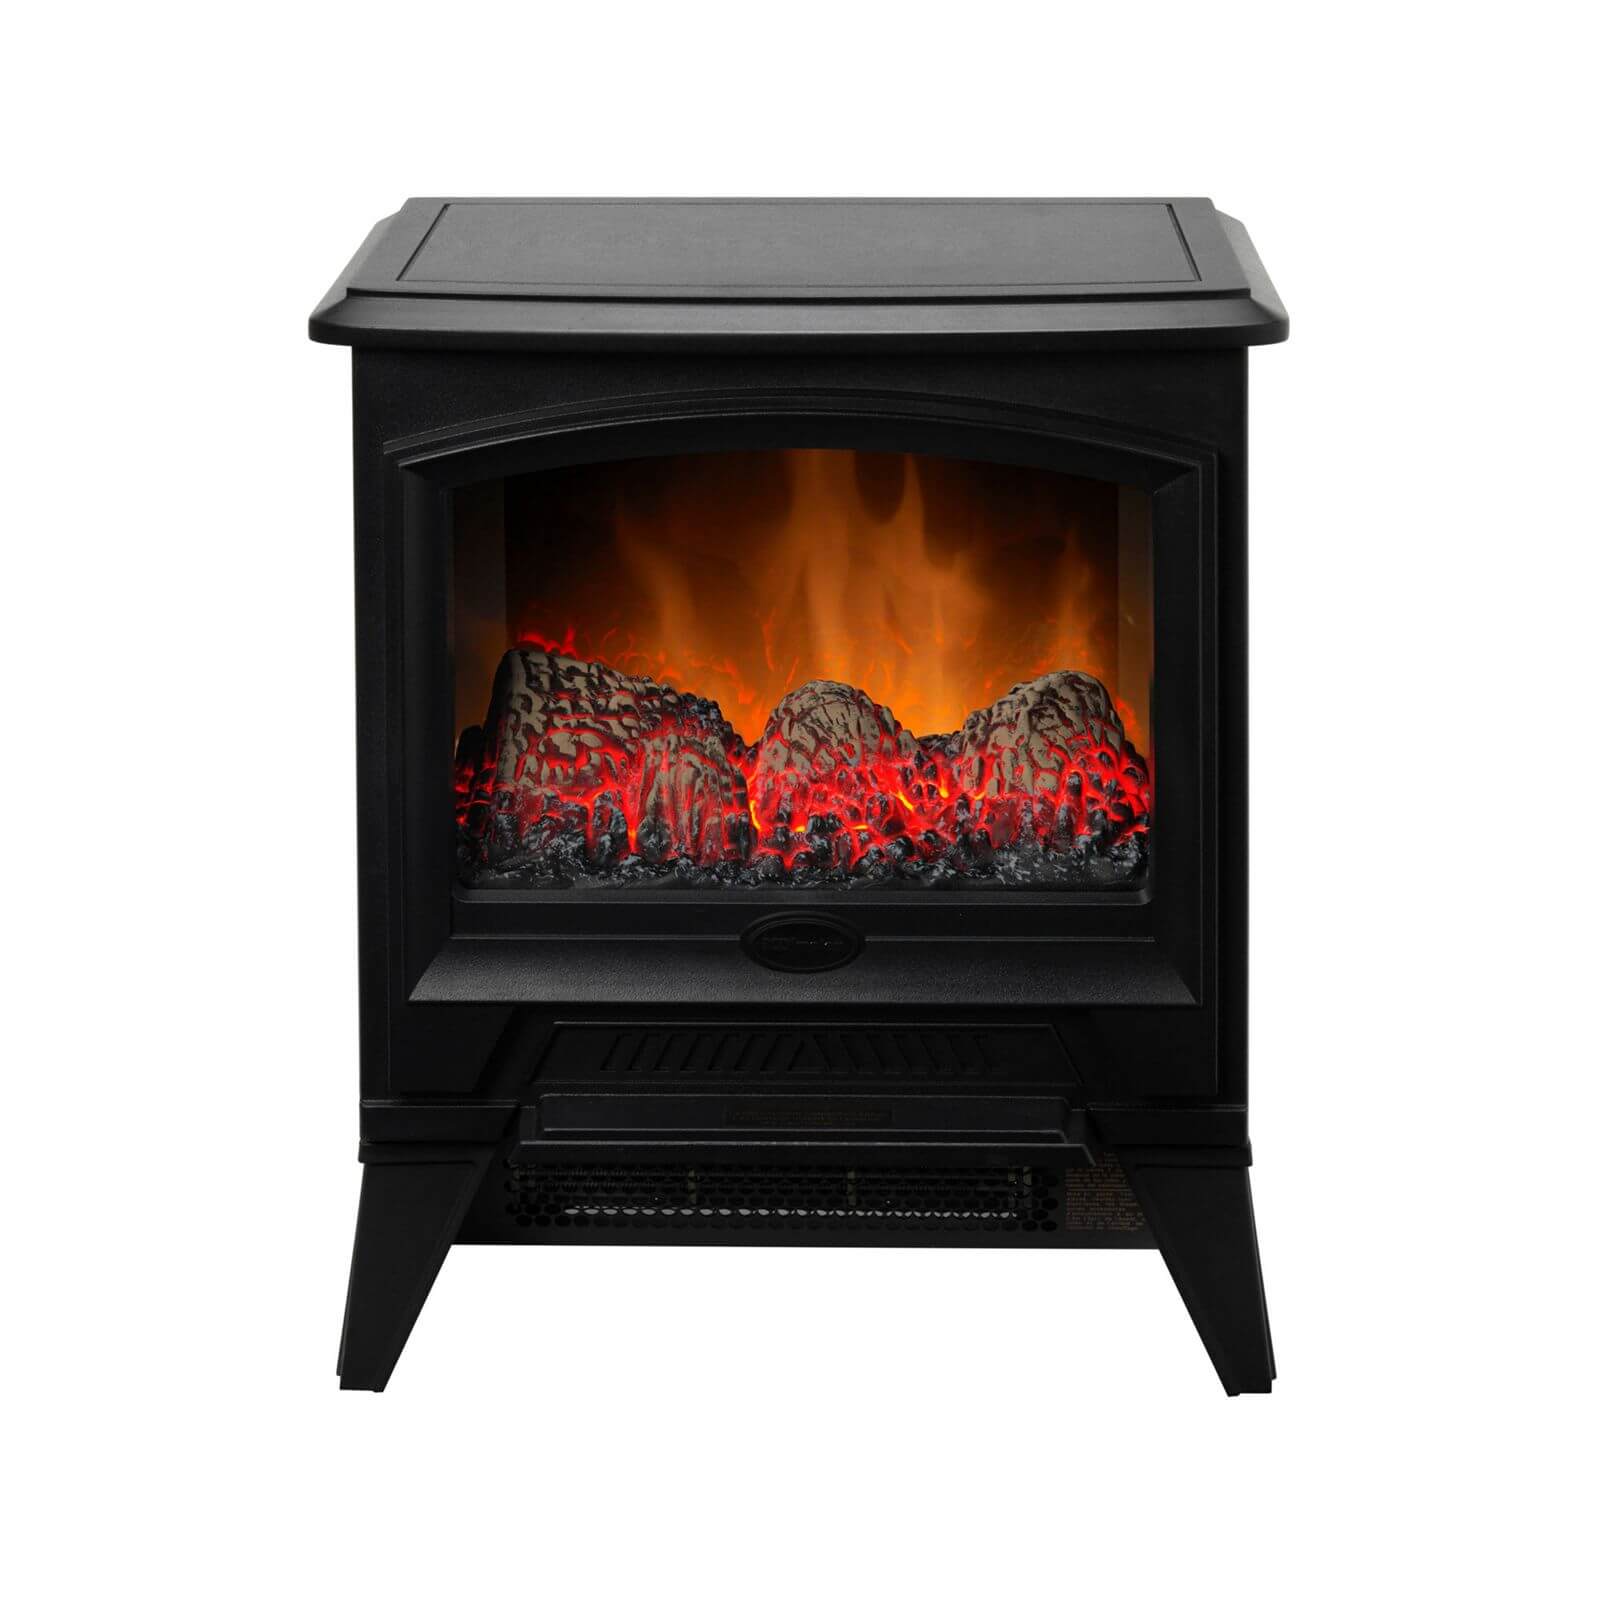 Dimplex Casper Optiflame® 2kW Freestanding Electric Stove with Realistic Log Effect Fuel Bed - Black